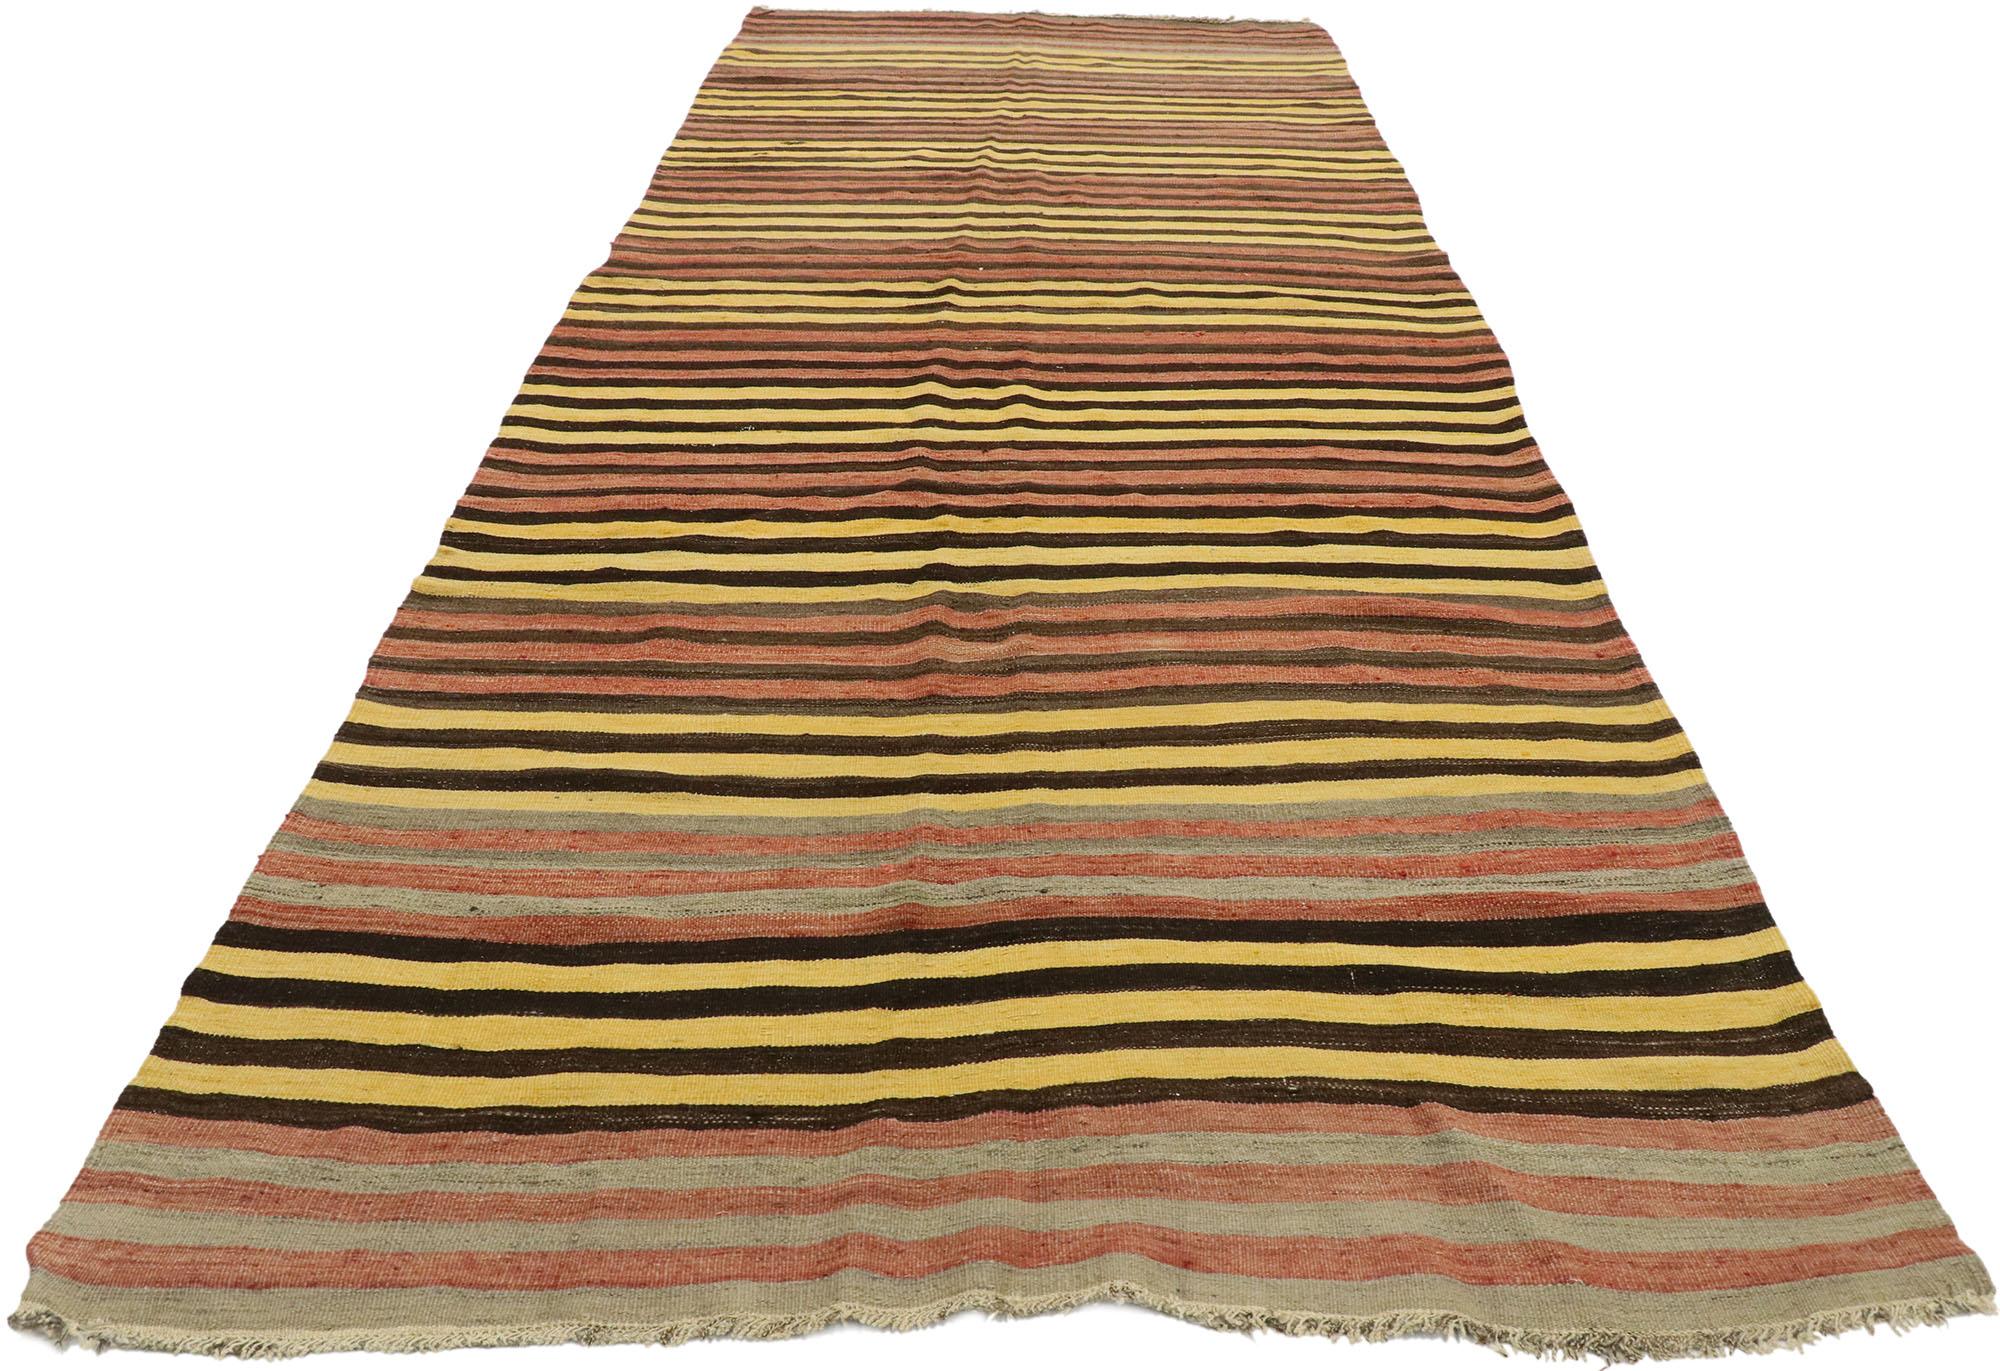 Hand-Woven Vintage Turkish Striped Kilim Rug with Mid-Century Modern Style For Sale